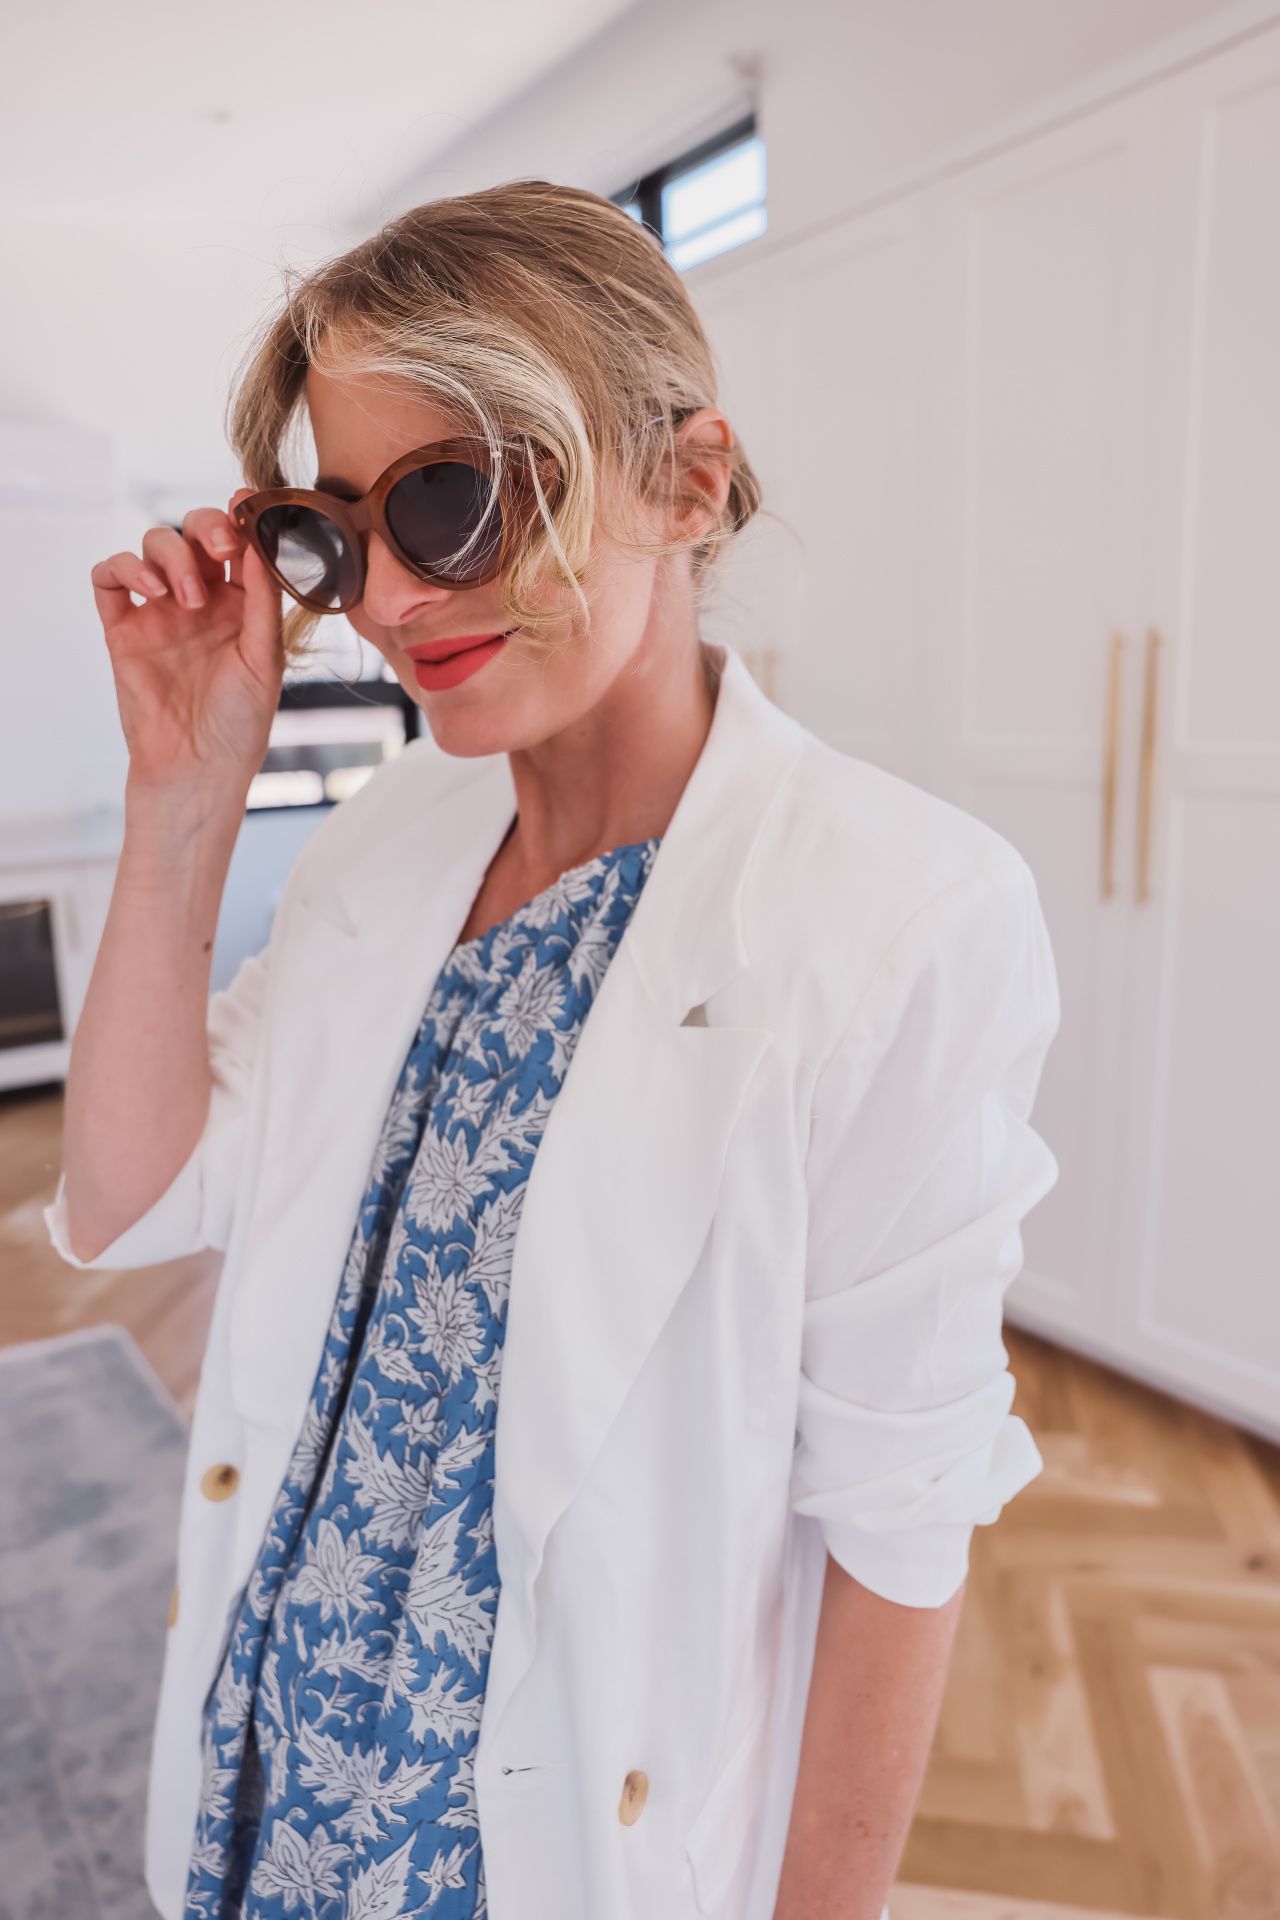 white blazer outfits, easy summer outfits for busy moms, easy summer outfits, summer mom outfits 2022, summer mom outfits, casual summer outfit ideas, cute mom outfits for summer, easy mom outfits, mom outfit ideas, casual mom outfits summer, summer outfit 2022, casual summer outfits for over 40, casual summer outfits for over 30, blue printed maxi dress by velvet, marc fisher mesh strappy heels, le specs sunglasses, erin busbee, busbee style, fashion over 40, telluride, colorado, evereve white double breasted blazer, How to wear a white blazer in summer, White blazer outfit summer, casual white blazer outfit, white blazer with jeans, how to wear a white blazer, ways to wear a white blazer